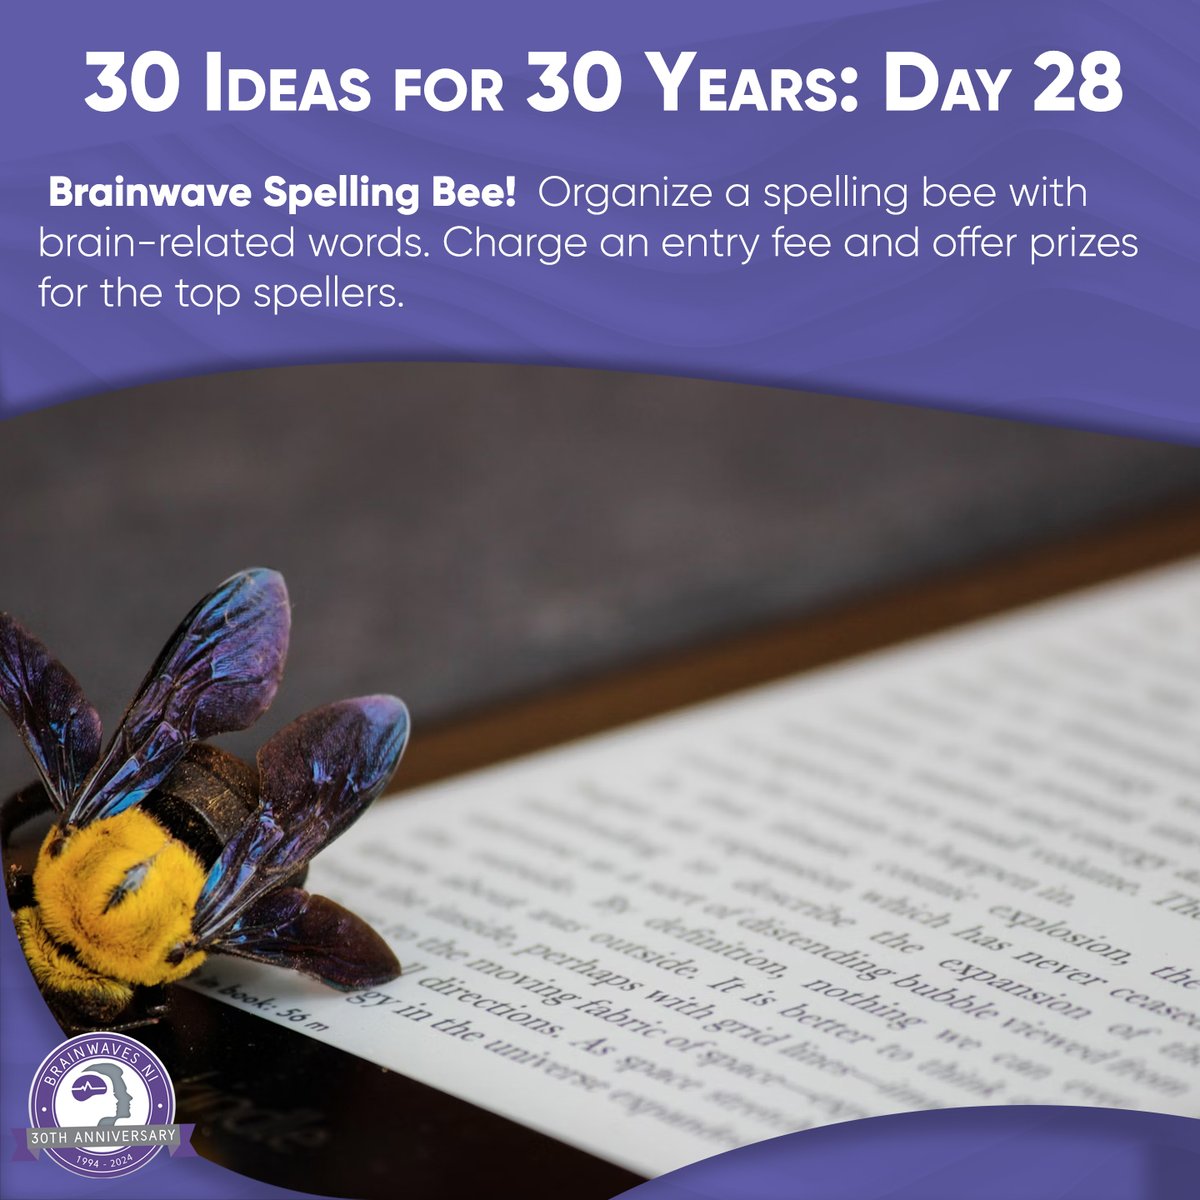 🐝 Brainwave Spelling Bee Alert!

🎉 Day Twenty-Eight of our '30 Ideas for 30 Years' campaign is here!

Organise a spelling bee with brain-related words. 

Charge an entry fee and offer prizes for the top spellers. 
Let's have some fun while supporting brain health!